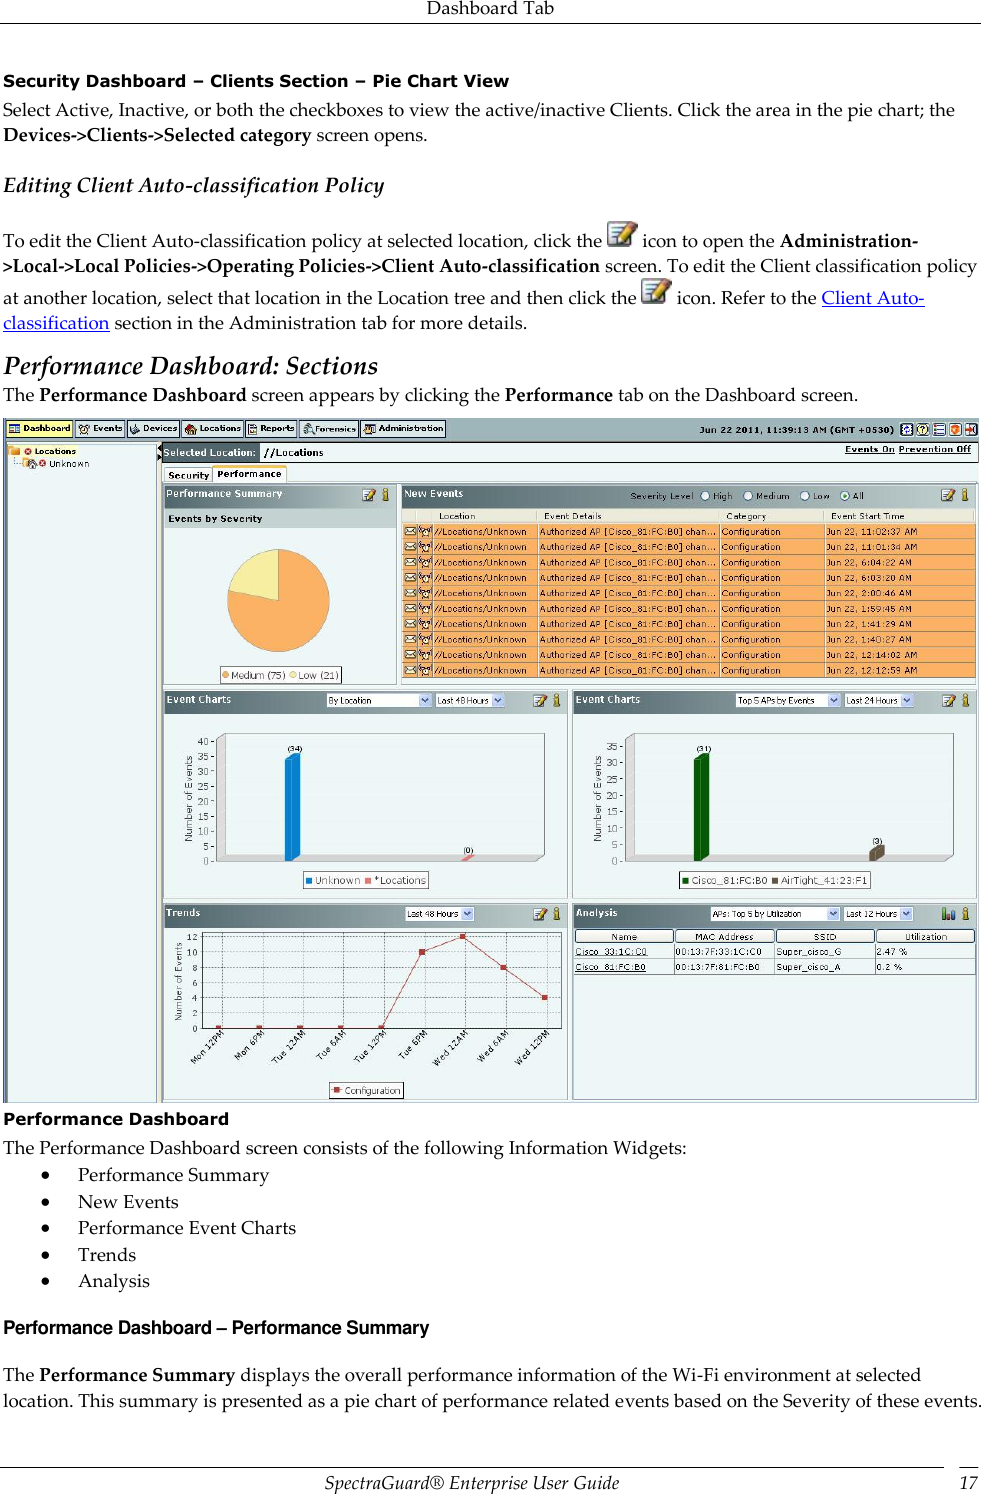 Dashboard Tab SpectraGuard®  Enterprise User Guide 17 Security Dashboard – Clients Section – Pie Chart View Select Active, Inactive, or both the checkboxes to view the active/inactive Clients. Click the area in the pie chart; the Devices-&gt;Clients-&gt;Selected category screen opens. Editing Client Auto-classification Policy To edit the Client Auto-classification policy at selected location, click the   icon to open the Administration-&gt;Local-&gt;Local Policies-&gt;Operating Policies-&gt;Client Auto-classification screen. To edit the Client classification policy at another location, select that location in the Location tree and then click the   icon. Refer to the Client Auto-classification section in the Administration tab for more details. Performance Dashboard: Sections The Performance Dashboard screen appears by clicking the Performance tab on the Dashboard screen.  Performance Dashboard The Performance Dashboard screen consists of the following Information Widgets:  Performance Summary  New Events  Performance Event Charts  Trends  Analysis Performance Dashboard – Performance Summary The Performance Summary displays the overall performance information of the Wi-Fi environment at selected location. This summary is presented as a pie chart of performance related events based on the Severity of these events. 